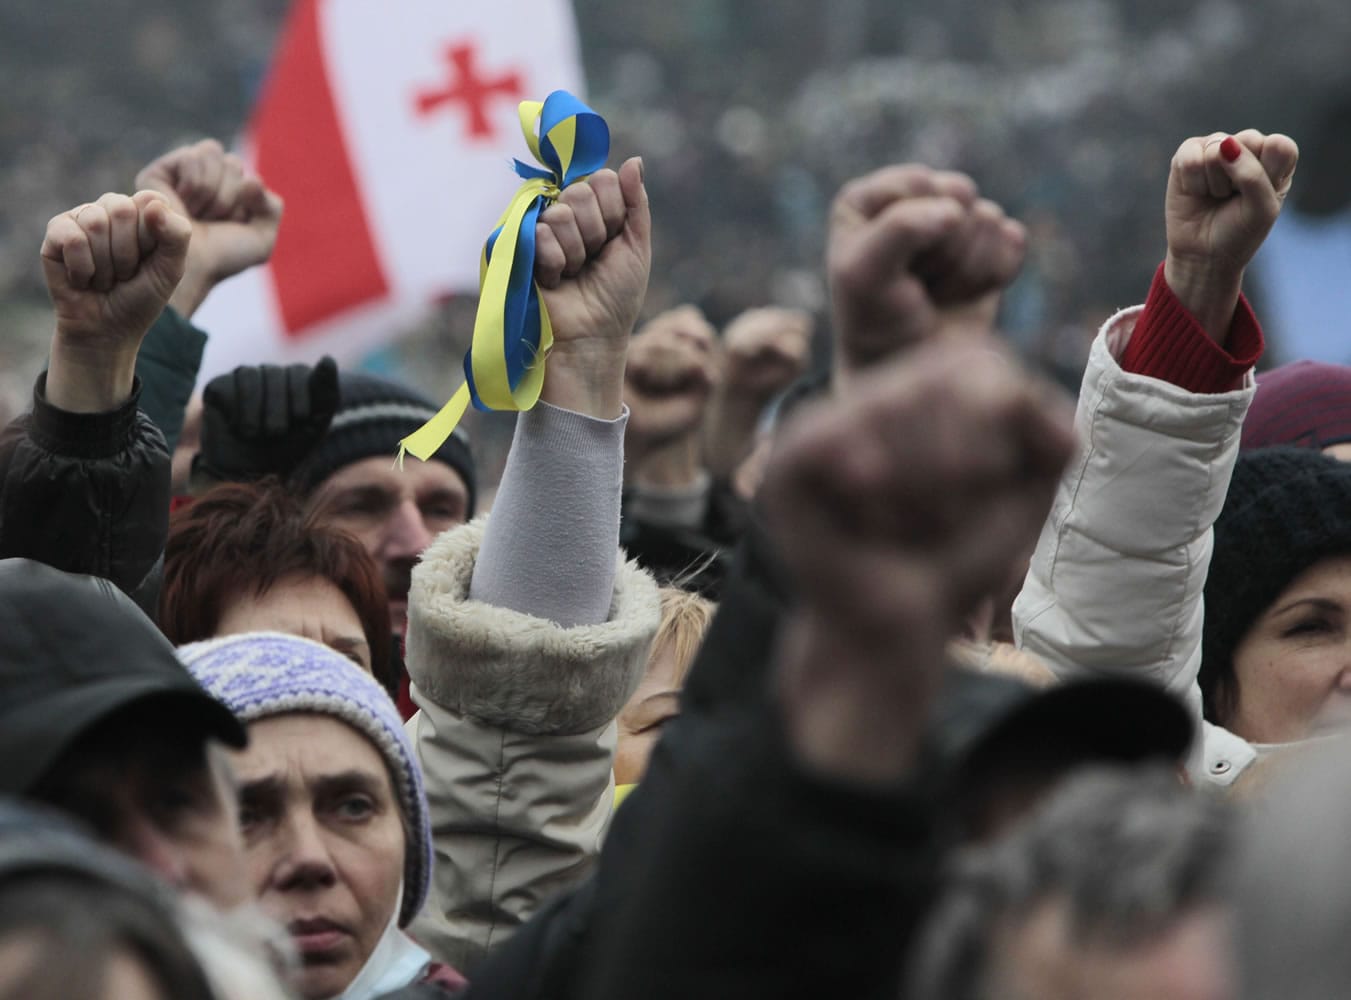 People shout slogans and gesture during a rally in Kiev's Independence Square on Sunday.